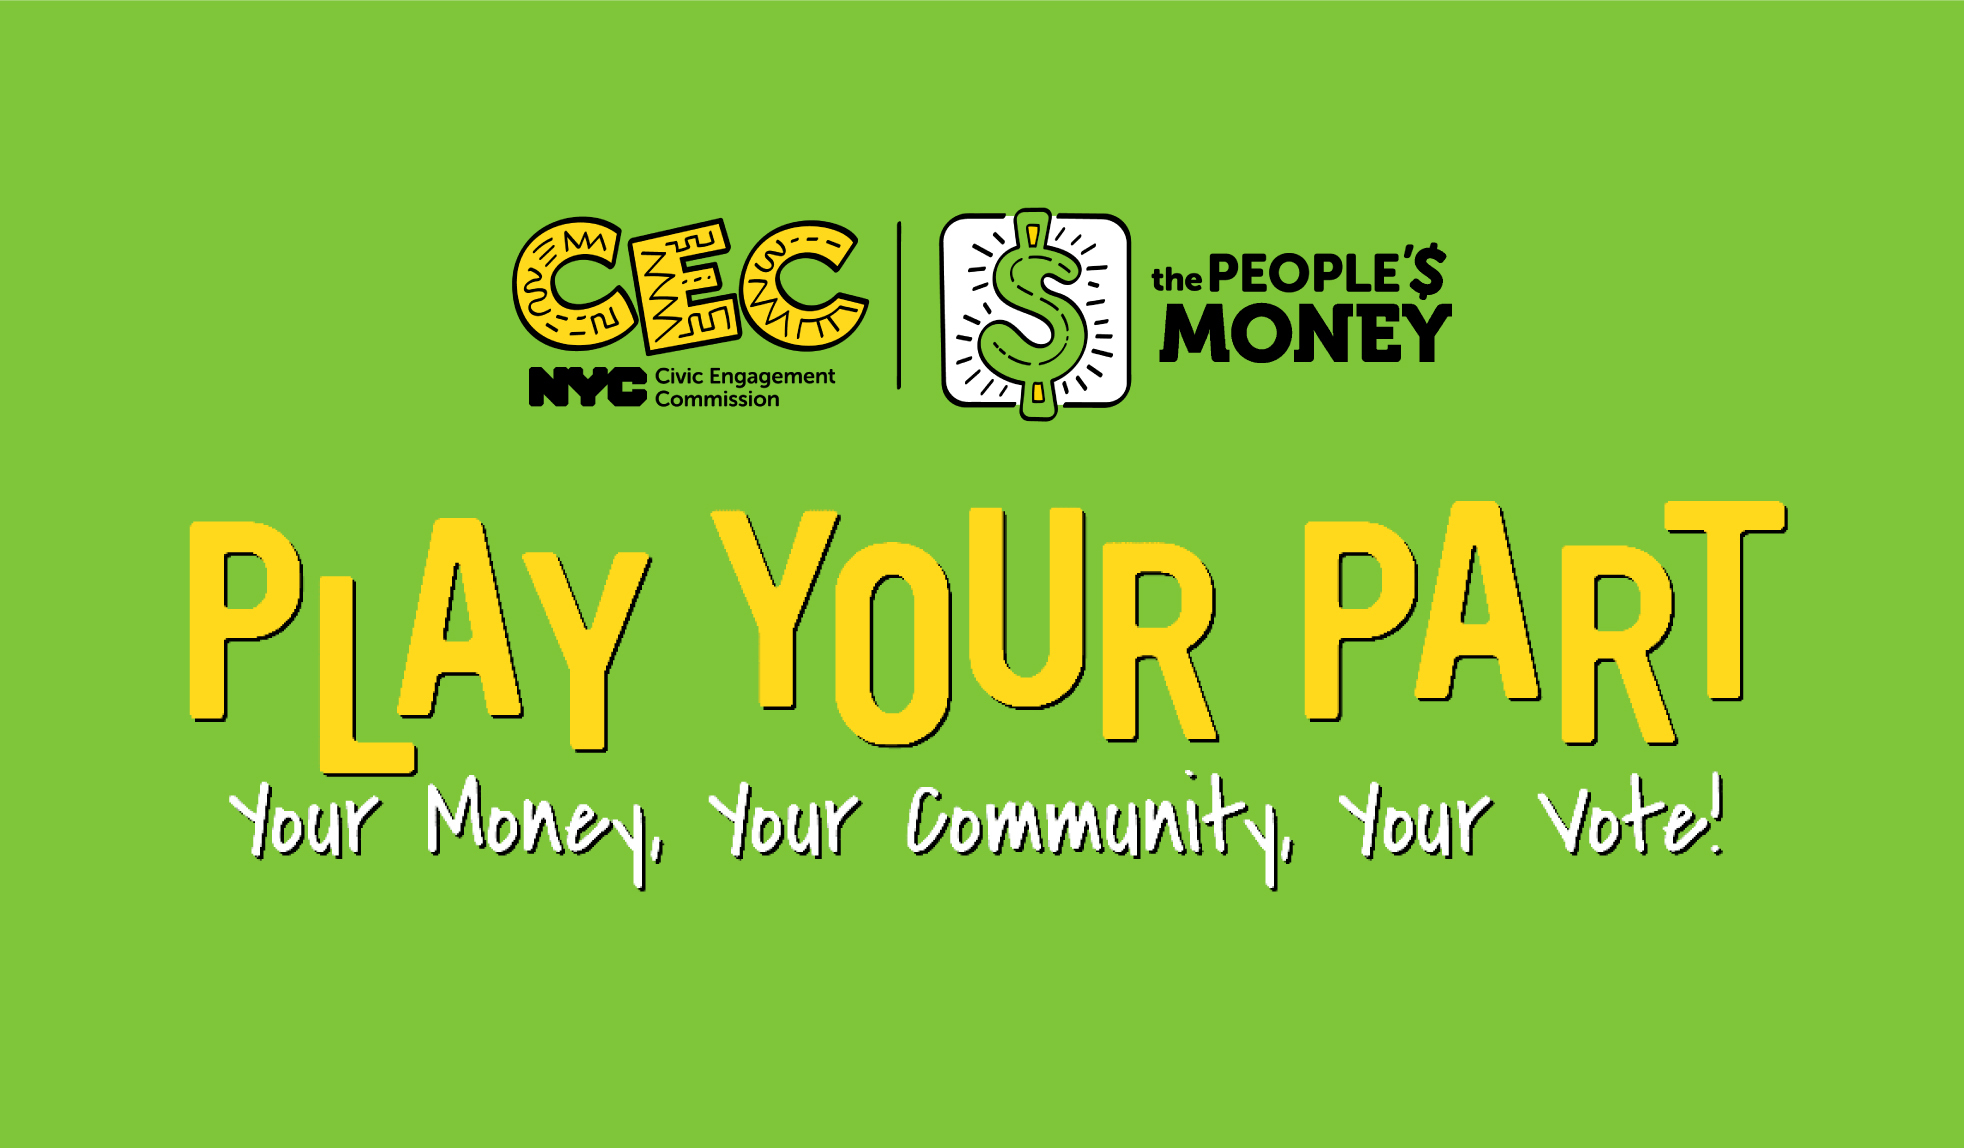 Vote in NYC’s citywide Participatory Budgeting process through June 12!